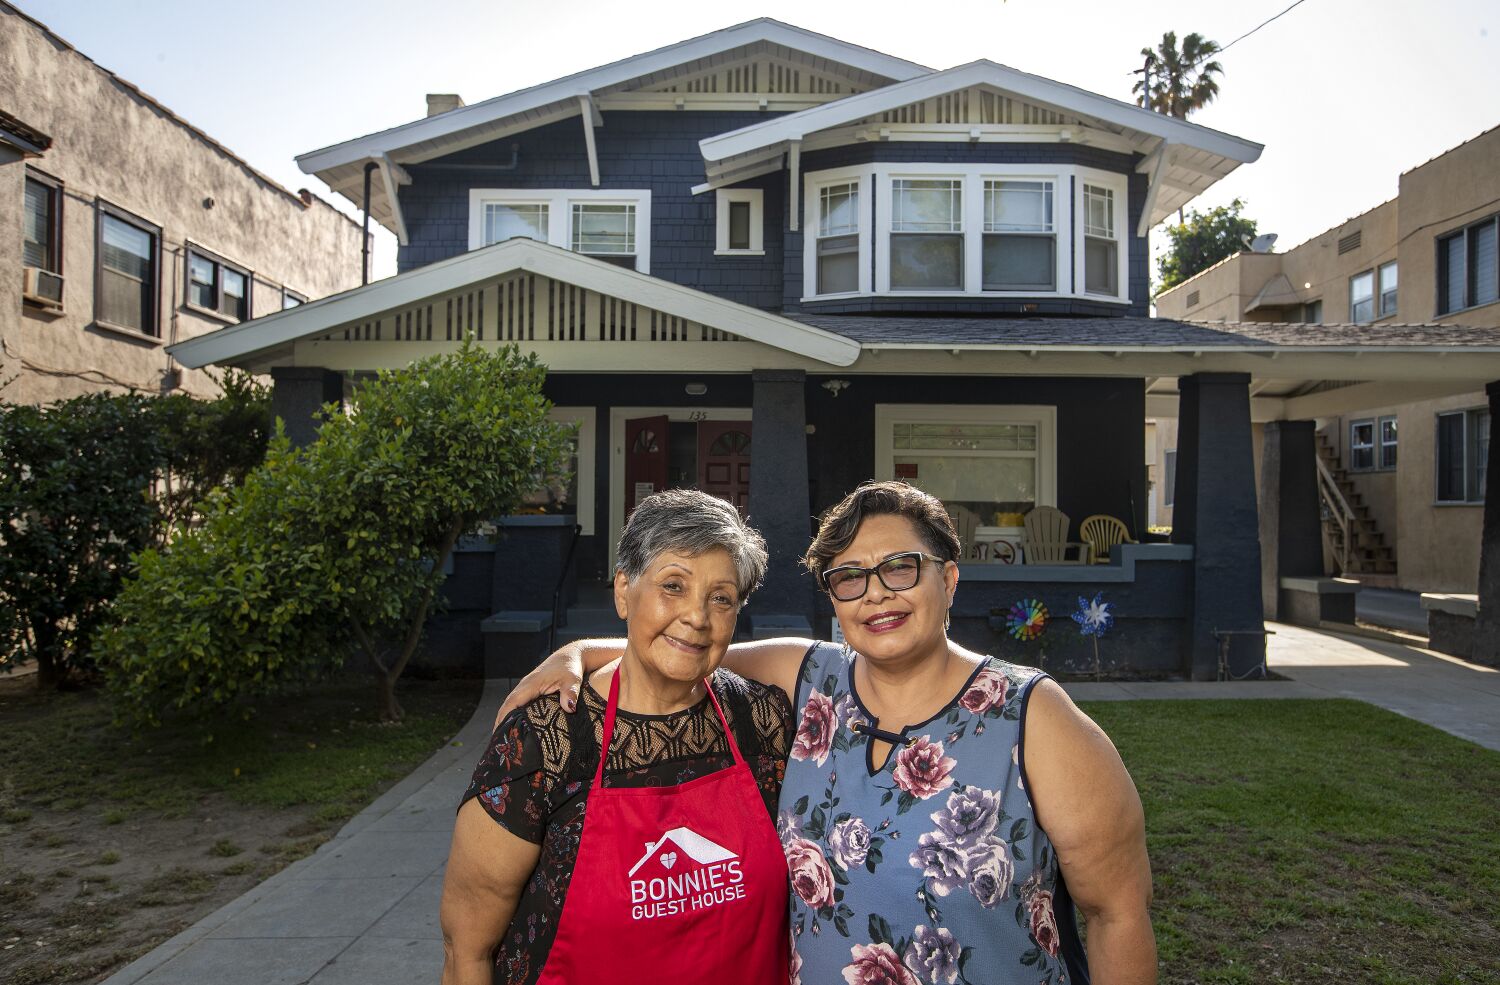 Homes for residents with mental illnesses are closing. Can state aid save them?